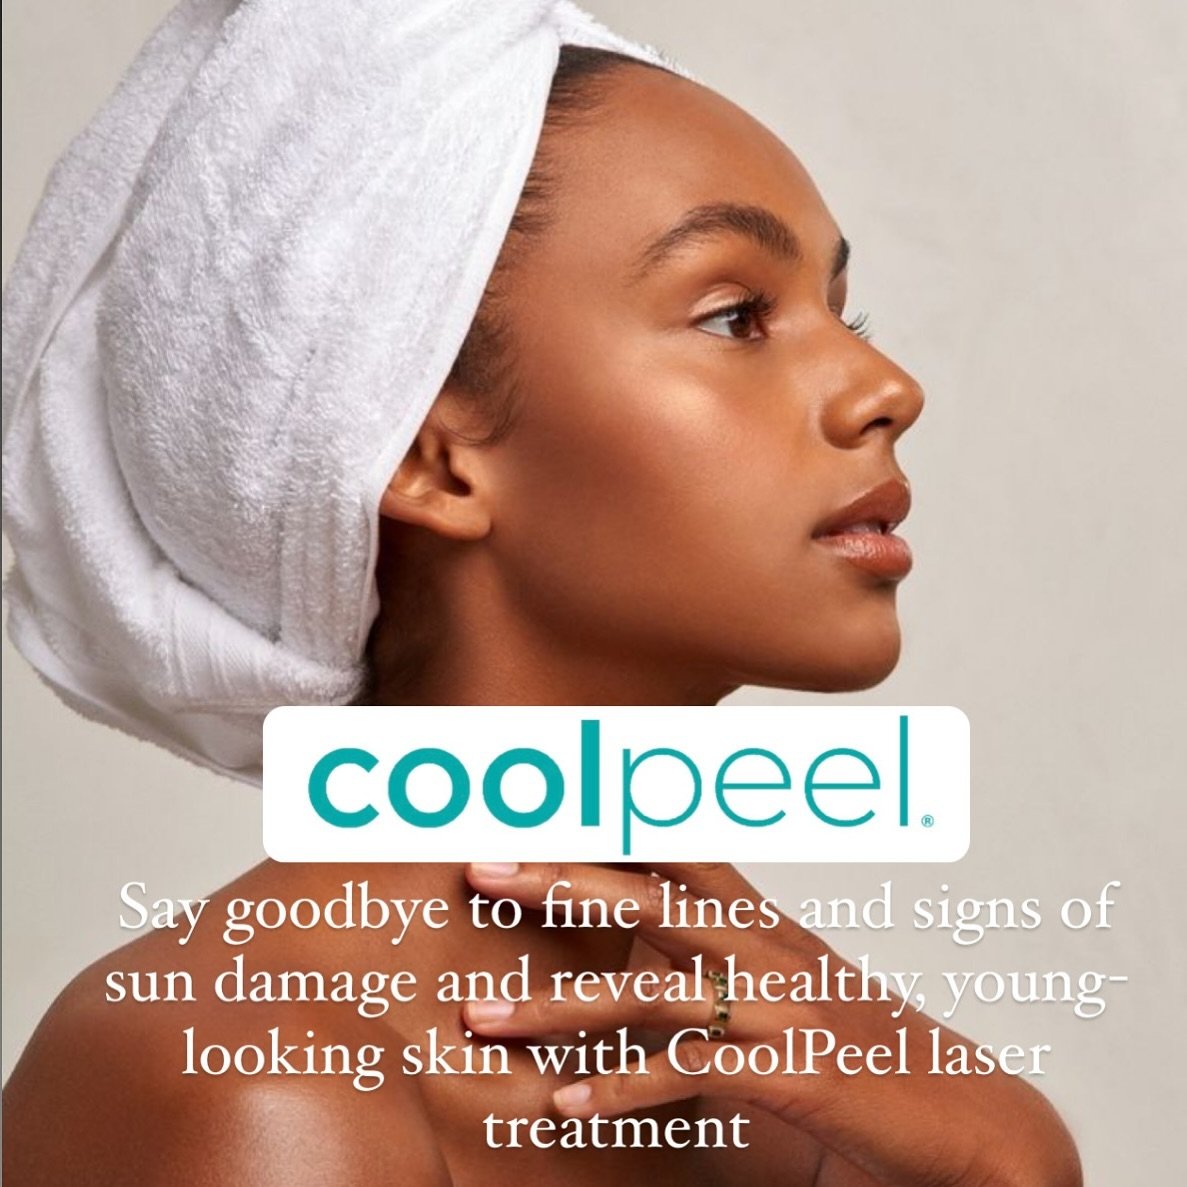 Meet Tetra AKA CoolPeel CO2 ❄️

Get the results of a CO2 laser without the discomfort or the downtime.

❄️ reduce fine lines and wrinkles 
❄️ minimize sun damage 
❄️ reduce pore size 
❄️ reduce scars
❄️ improve overall skin texture and tone 

Reveal 